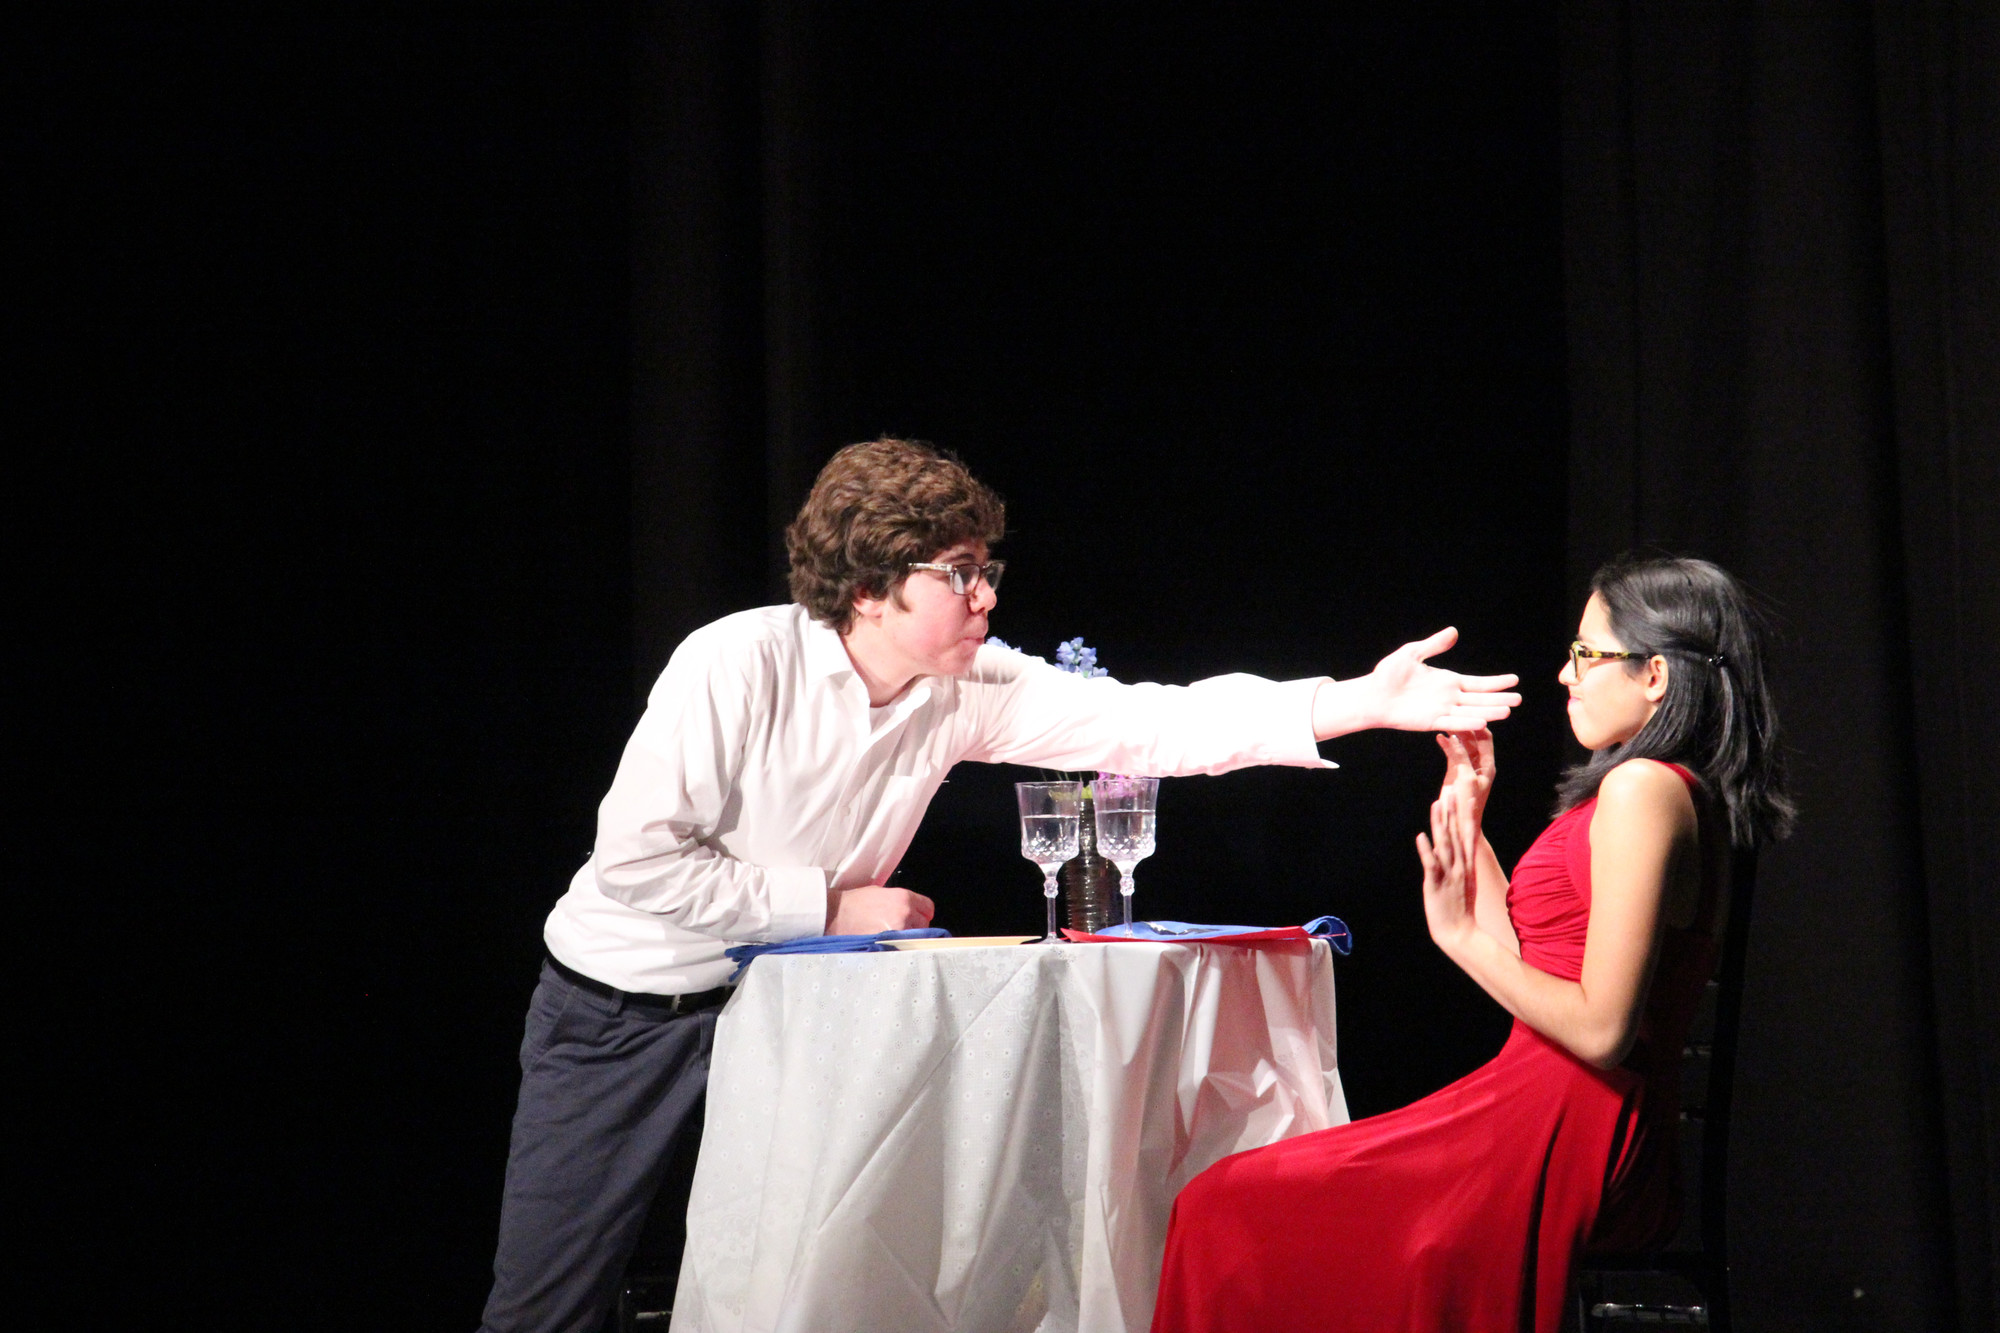 Amanda Ventura played a girl on a series of blind dates in the play “Check, Please.” Her overdramatic date was played by Jacob DeVito.